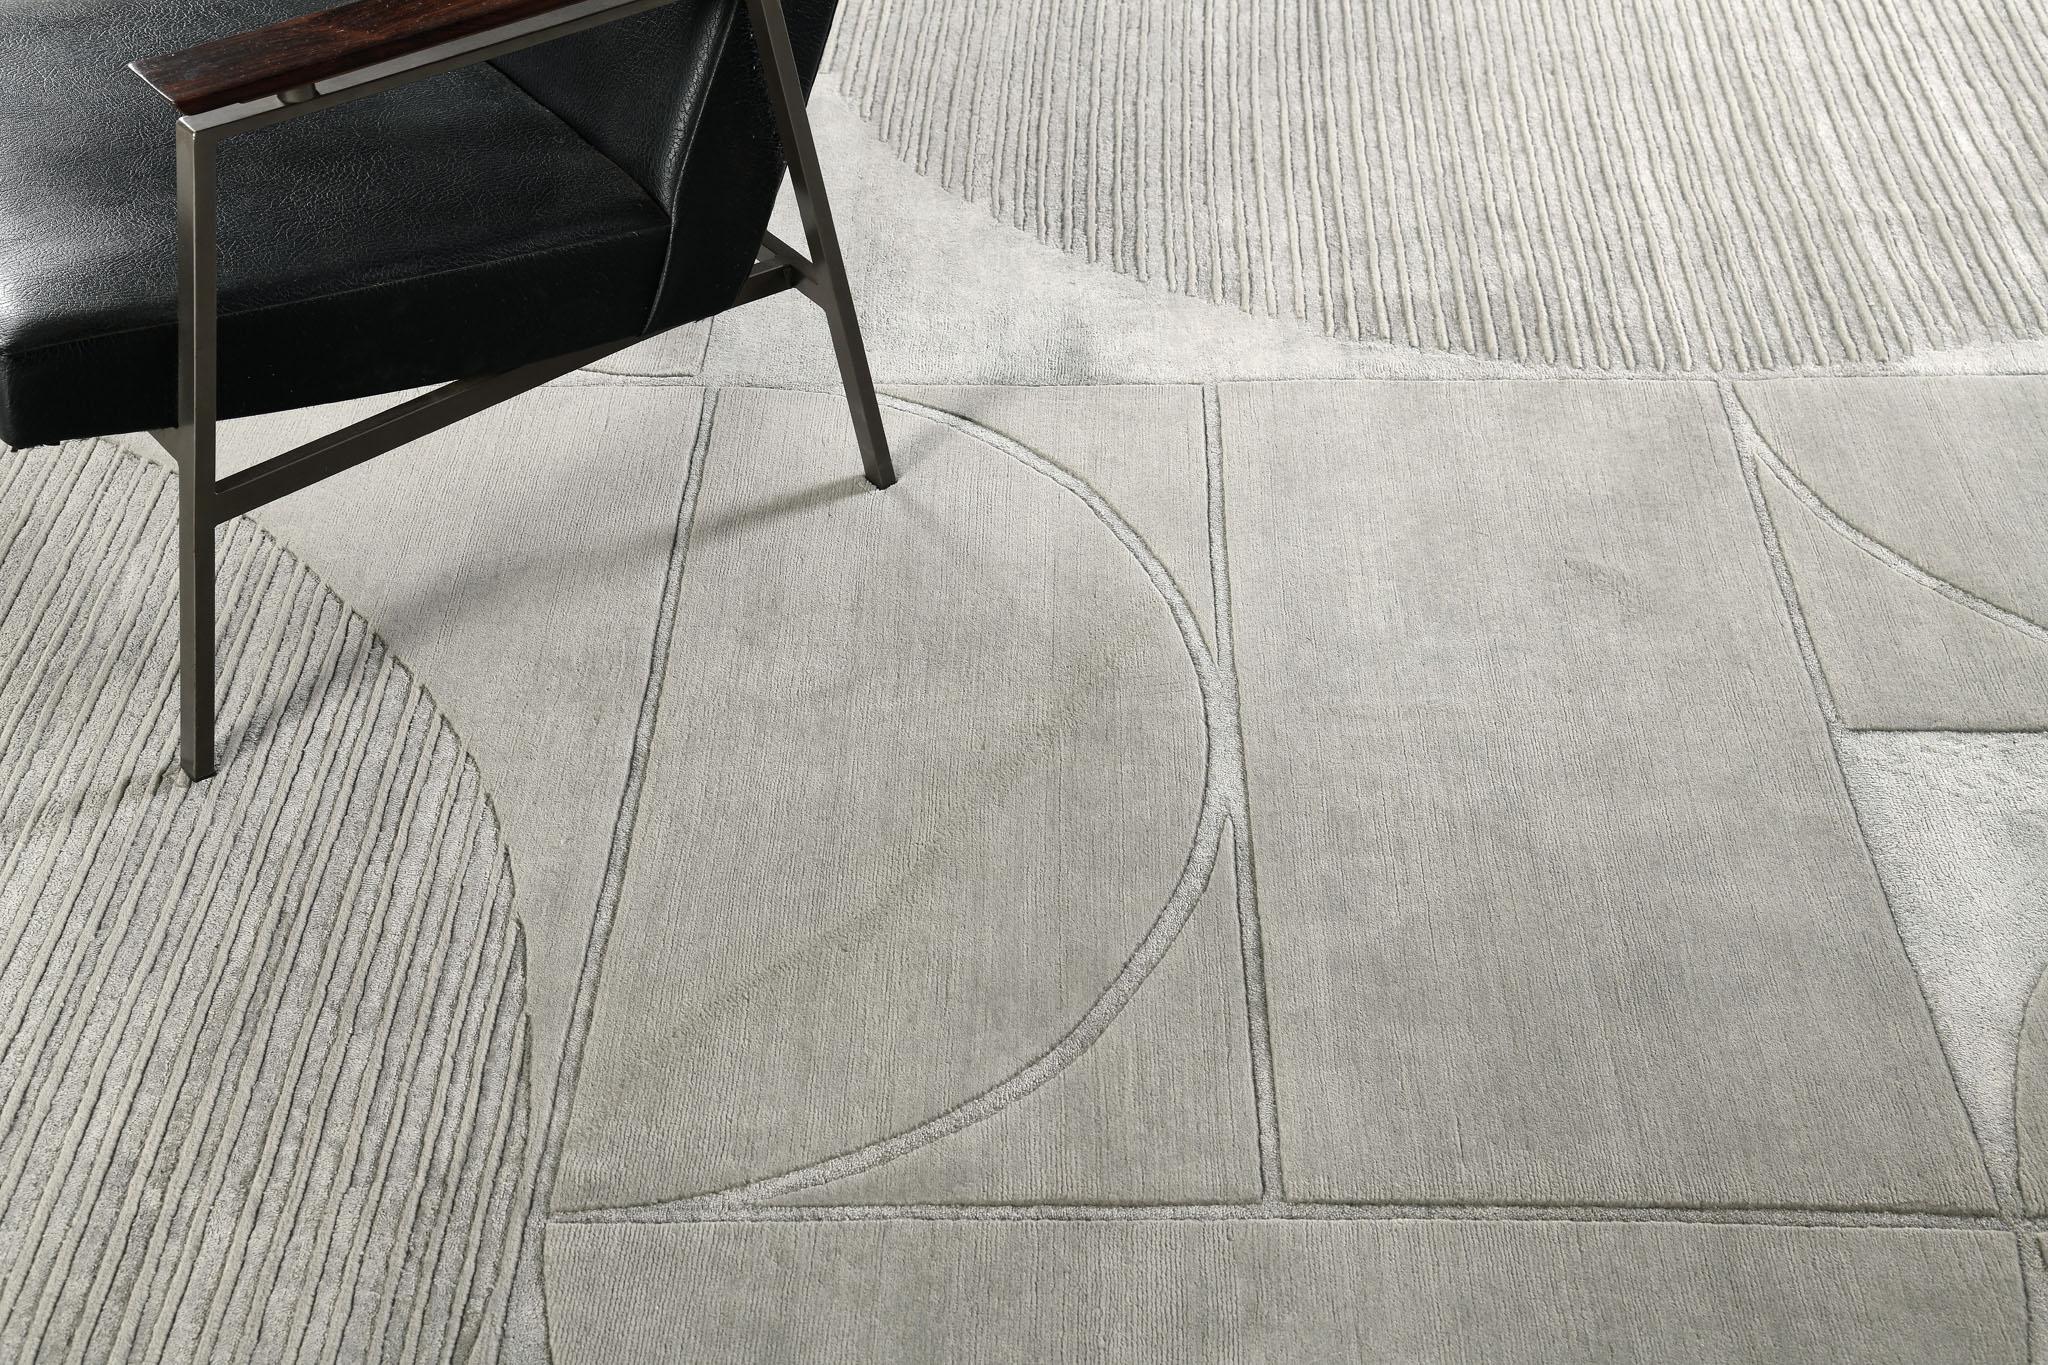 Triana is a perfect variety of rugs and a perfect representation of neutral tones and art. A masterpiece that will never get old. Our Design Rhymes masterpiece is excellent to give an accent to every home interior.

Rug Number 31016
Size 9' 0